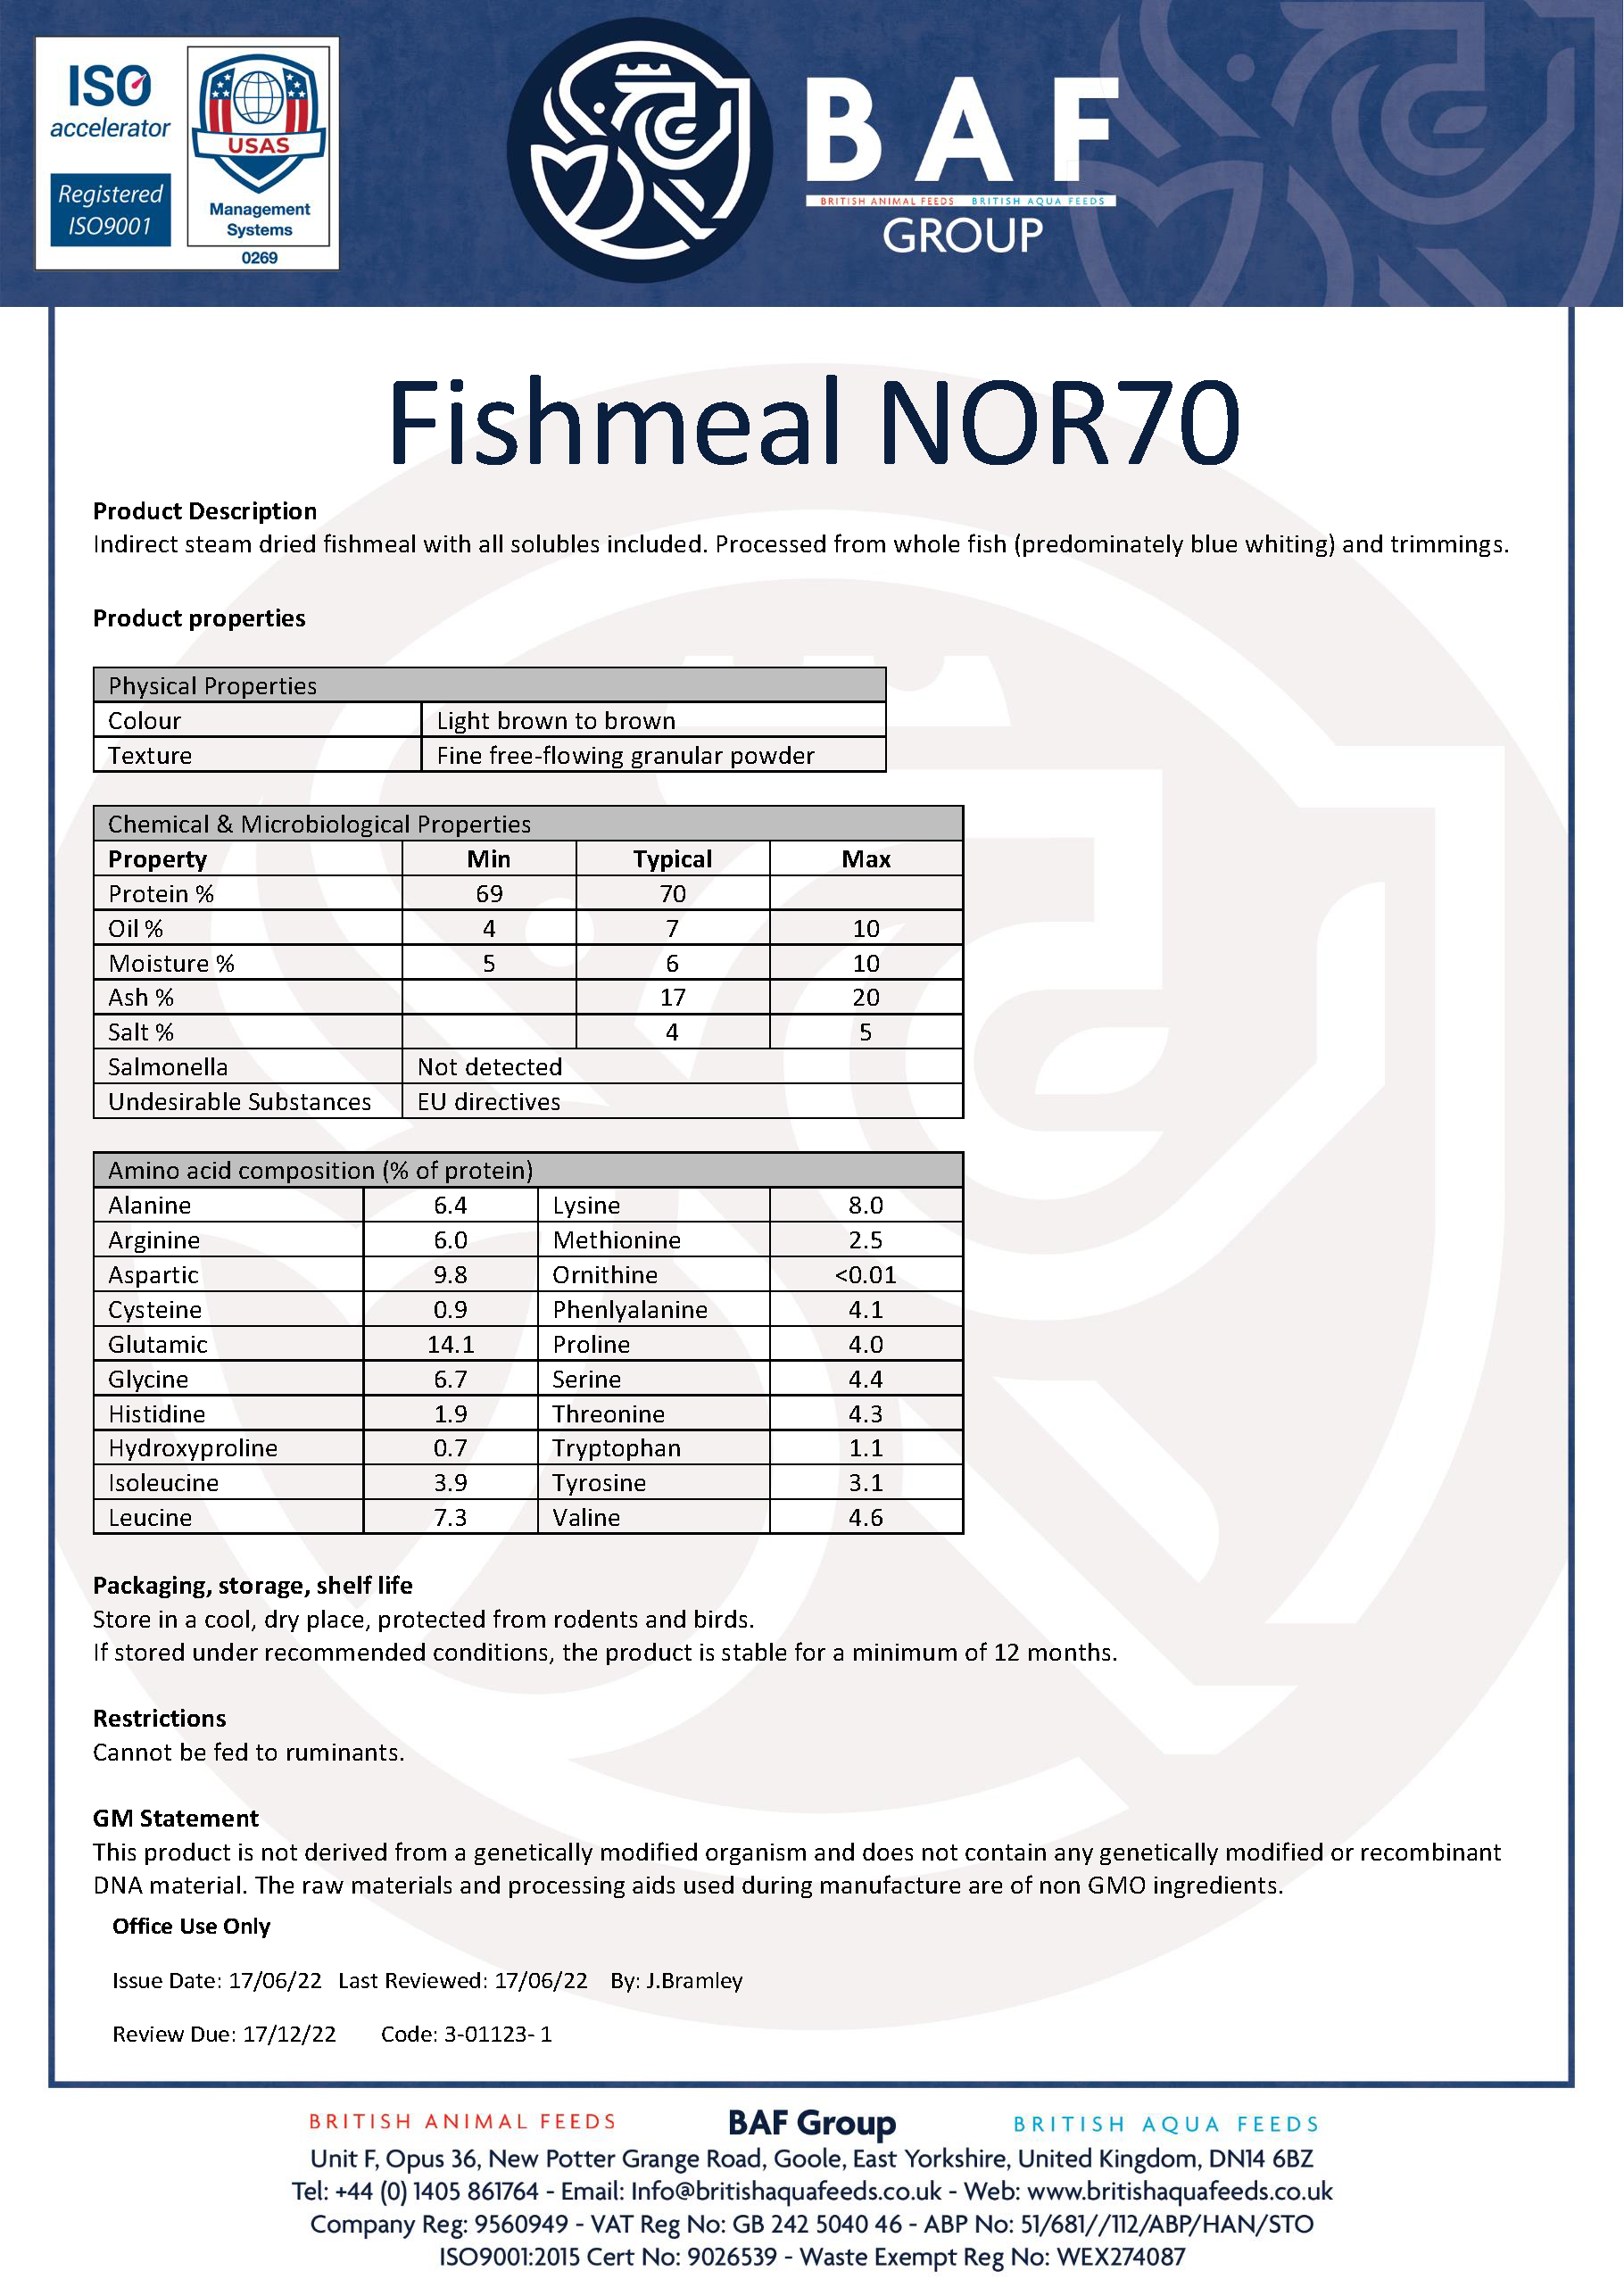 fishmeal-nor70-product-spec-baf.png